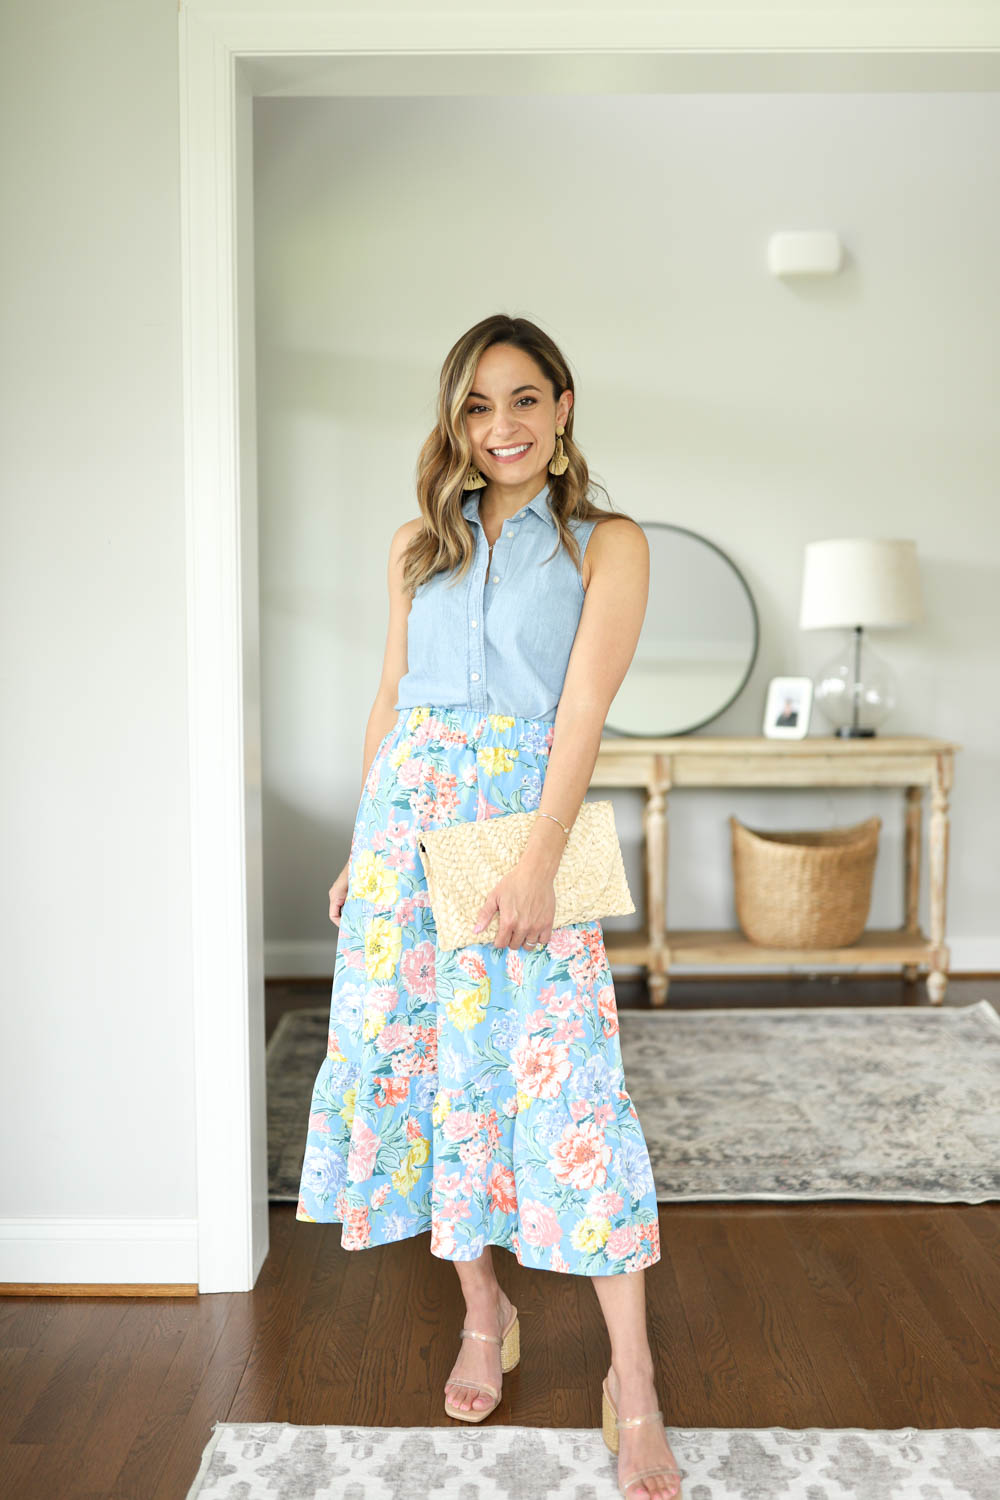 Four ways to wear a midi skirt via petite style blog pumps and push-ups |  midi skirt outfits | midi skirts | petite friendly midi skirts 